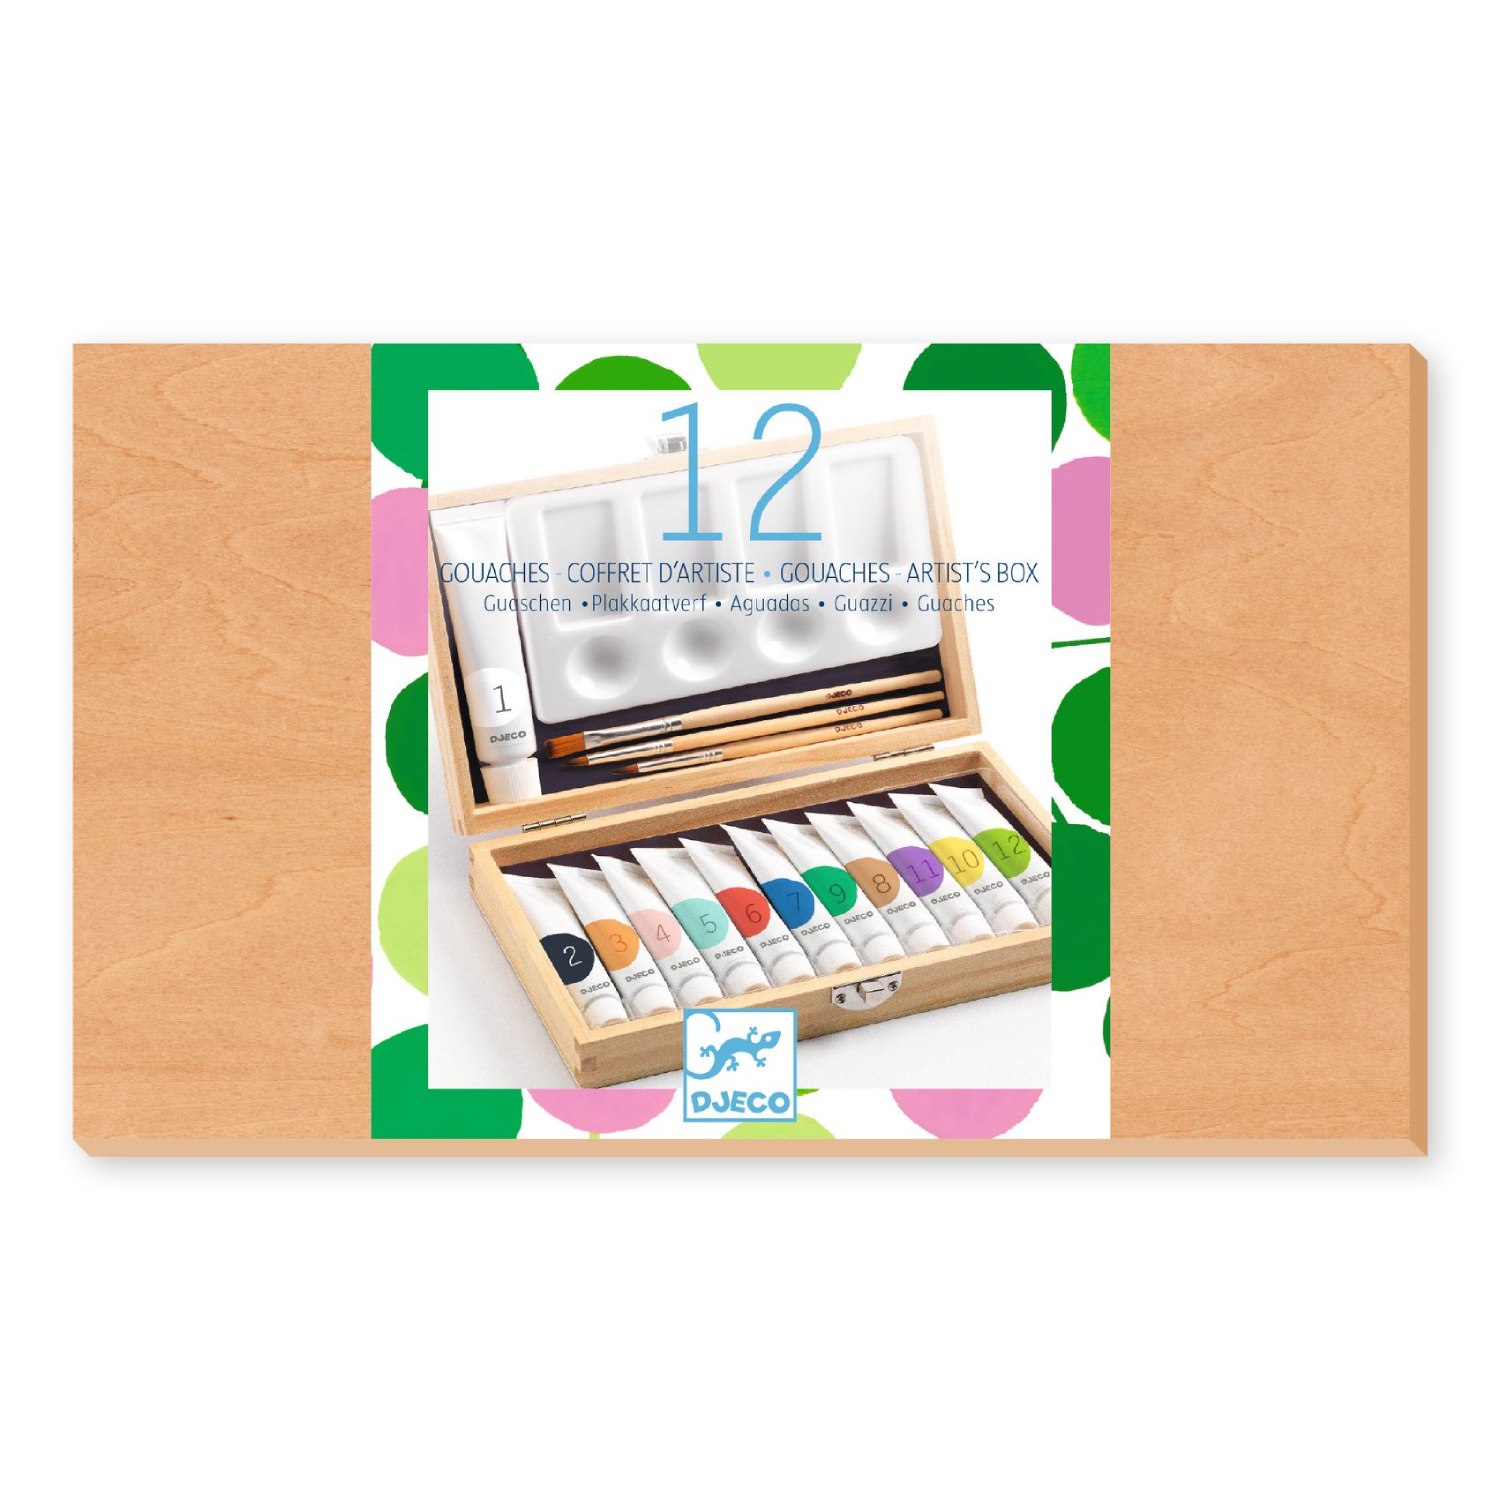 Artist's box 12 gouaches by Djeco